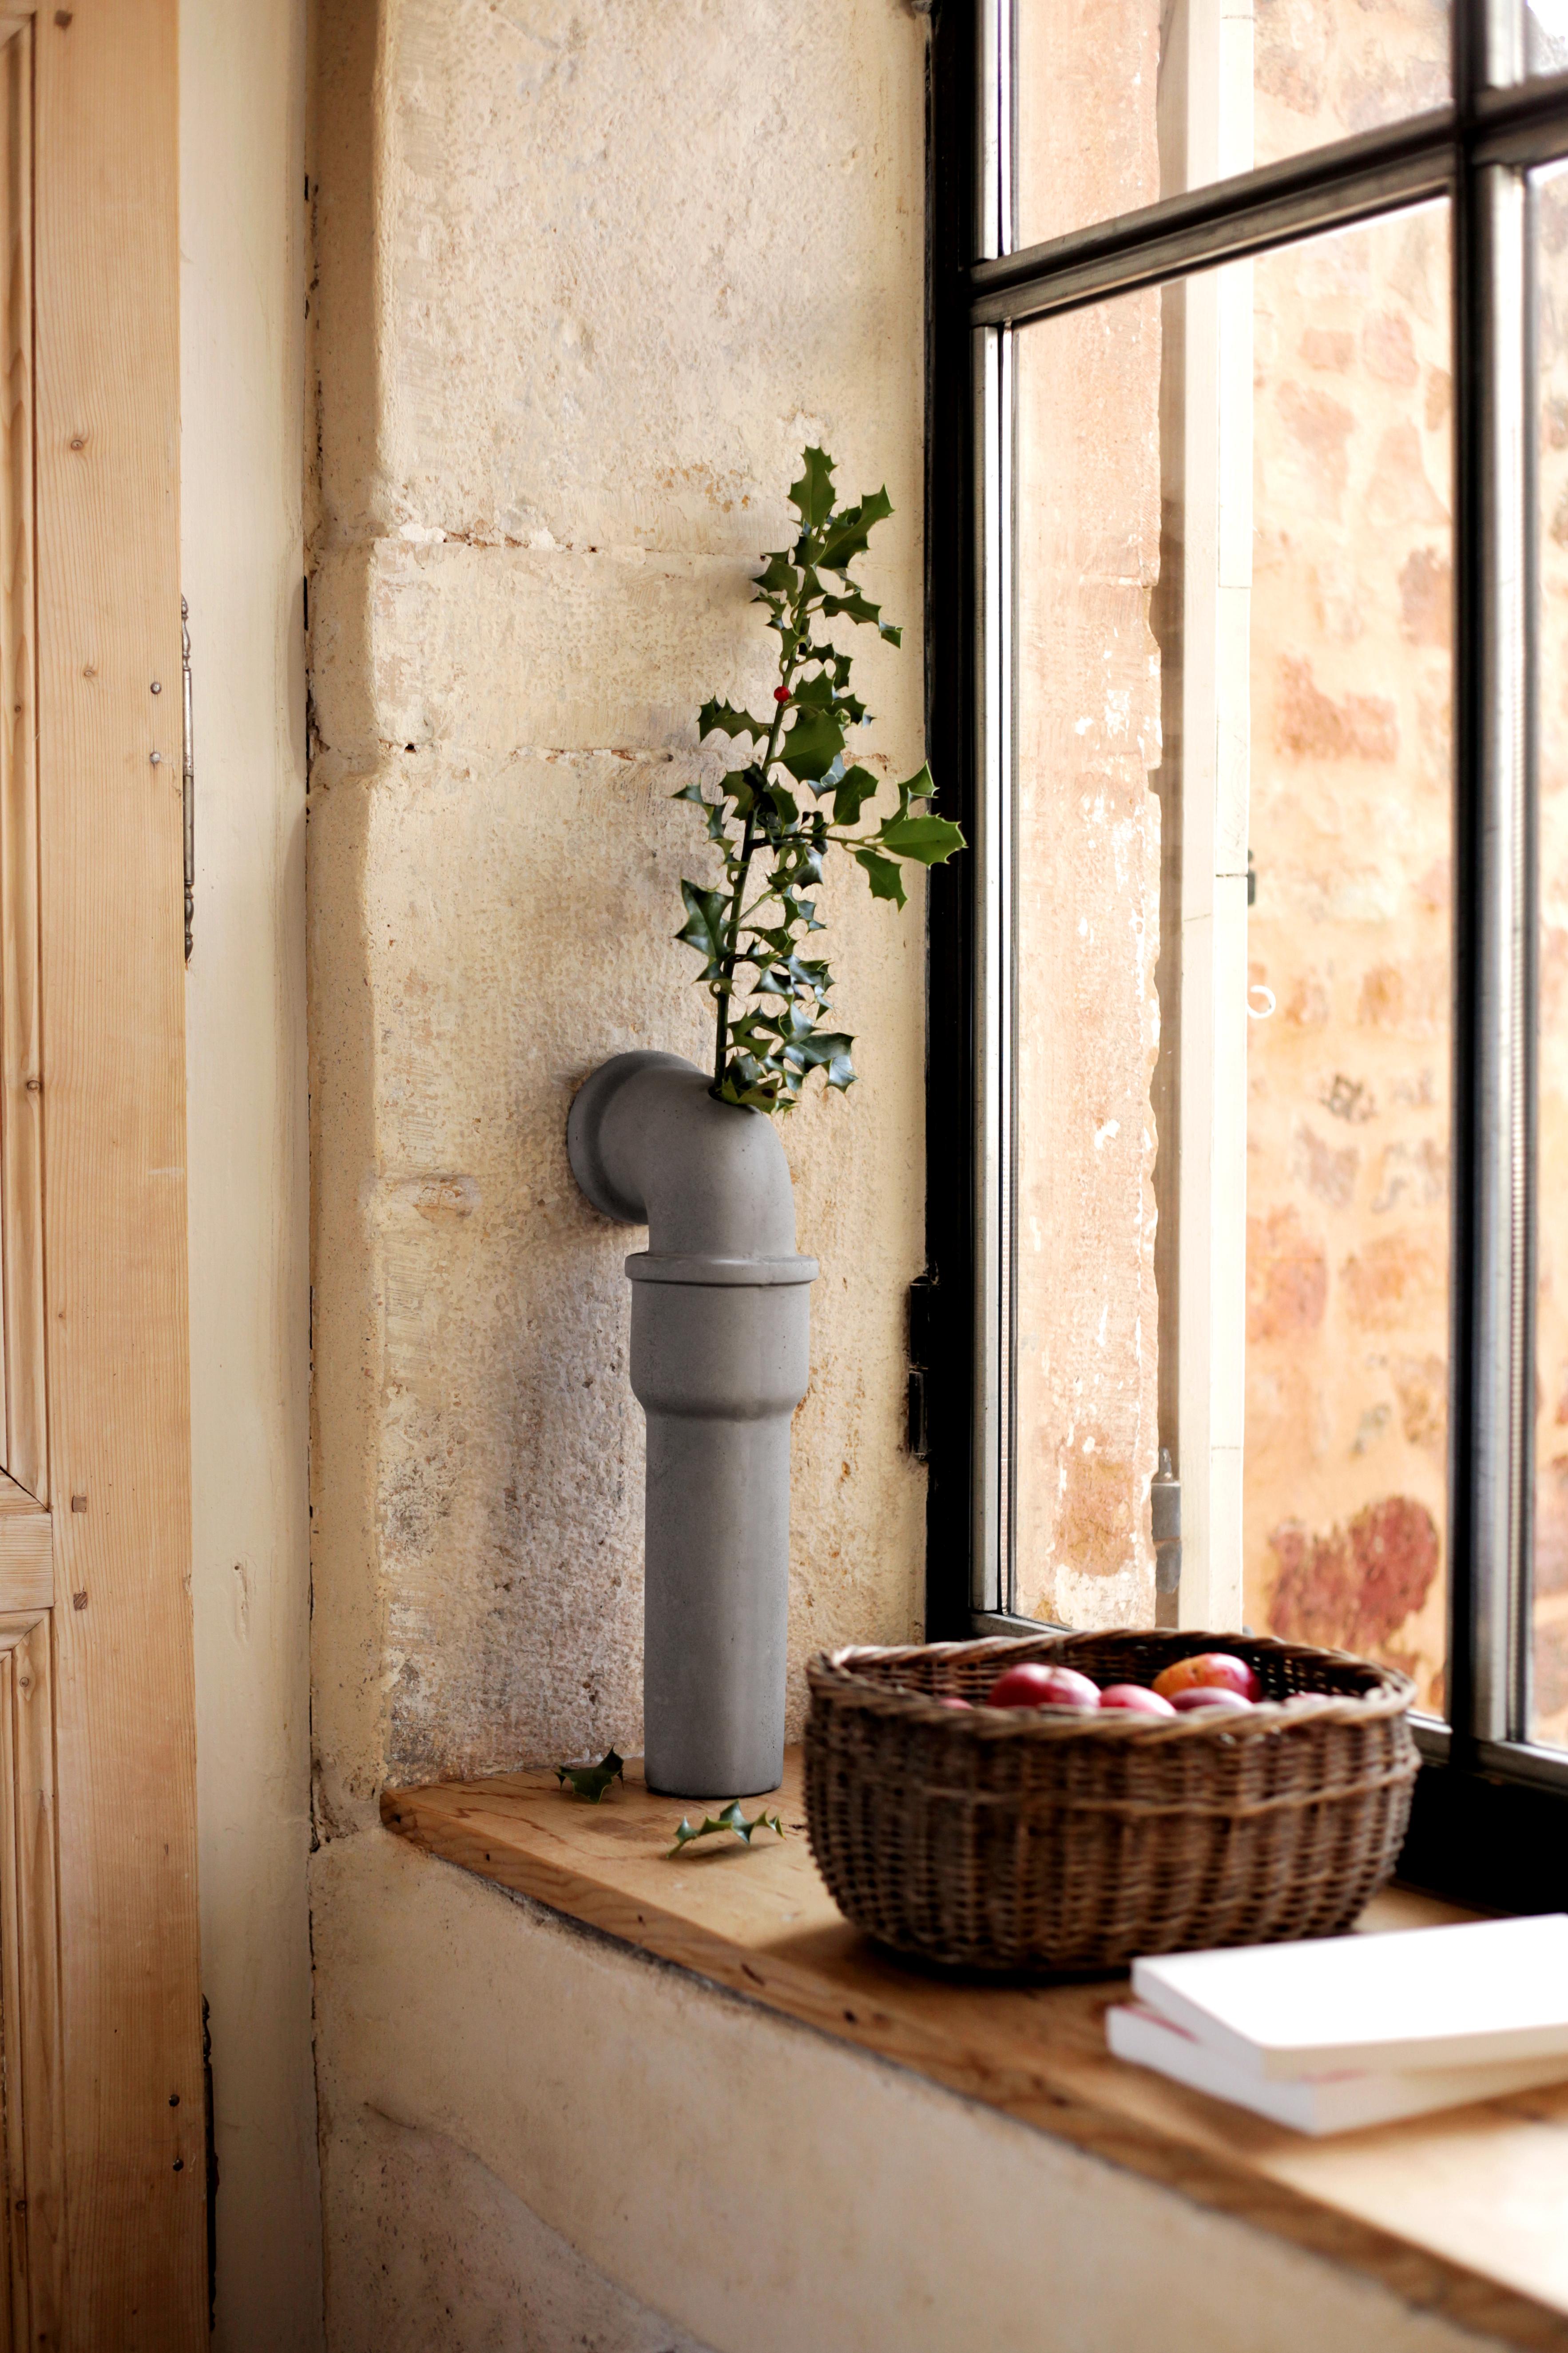 The Concrete Pipeline stem vase, designed by the french designer Bertrand Jayr for Lyon Béton, is inspired by the urban city. It diverts the visible pipelines we see in the streets and creates a dialogue between the inside and the outside. When